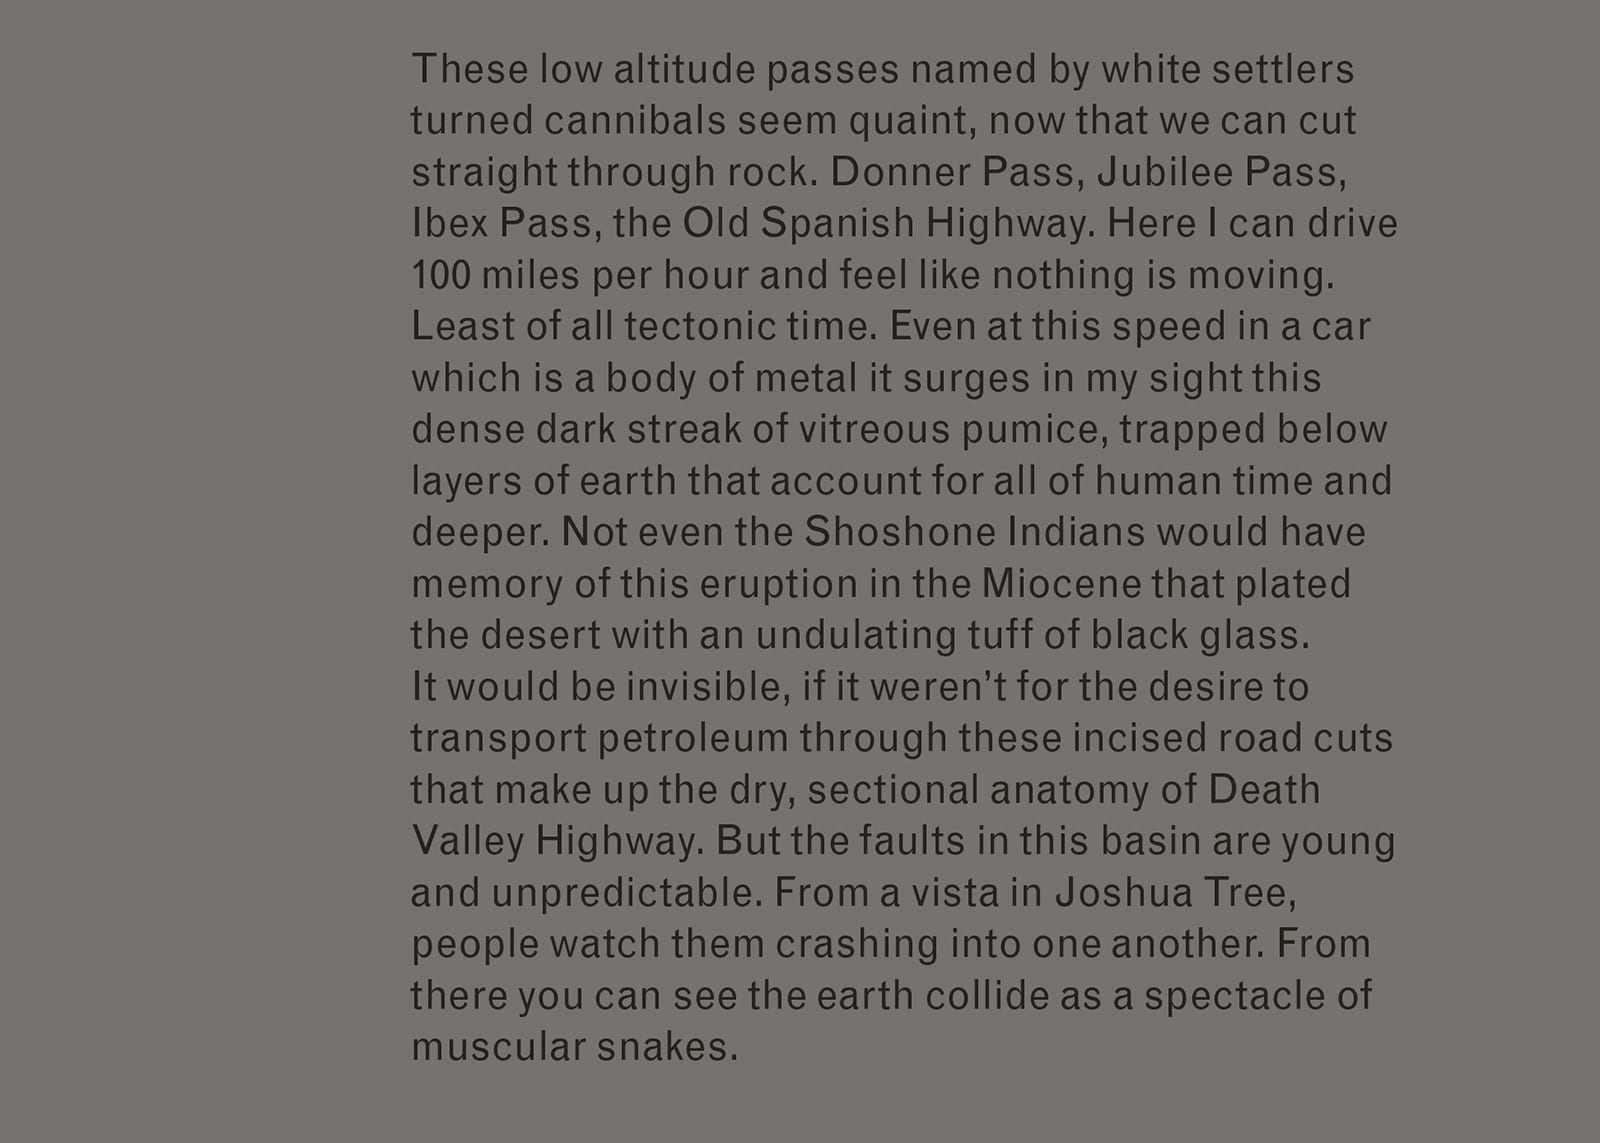 Excerpt of text from Imaginary Explosions. Text reads: These low altitude passes named by white settlers turned cannibals seem quaint, now that we can cut straight through rock. Donner Pass, Jubilee Pass, Ibex Pass, the Old Spanish Highway. Here I can drive 100 miles per hour and feel like nothing is moving. Least of all tectonic time. Even at this speed in a car which is a body of metal it surges in my sight this dense dark streak of vitreous pumice, trapped below layers of earth that account for all of human time and deeper. Not even the Shoshone Indians would have memory of this eruption in the Miocene that plated the desert with an undulating tuff of black glass. It would be invisible, if it weren’t for the desire to transport petroleum through these incised road cuts that make up the dry, sectional anatomy of Death Valley Highway. But the faults in this basin are young and unpredictable. From a vista in Joshua Tree, people watch them crashing into one another. From there you can see the earth collide as a spectacle of muscular snakes.